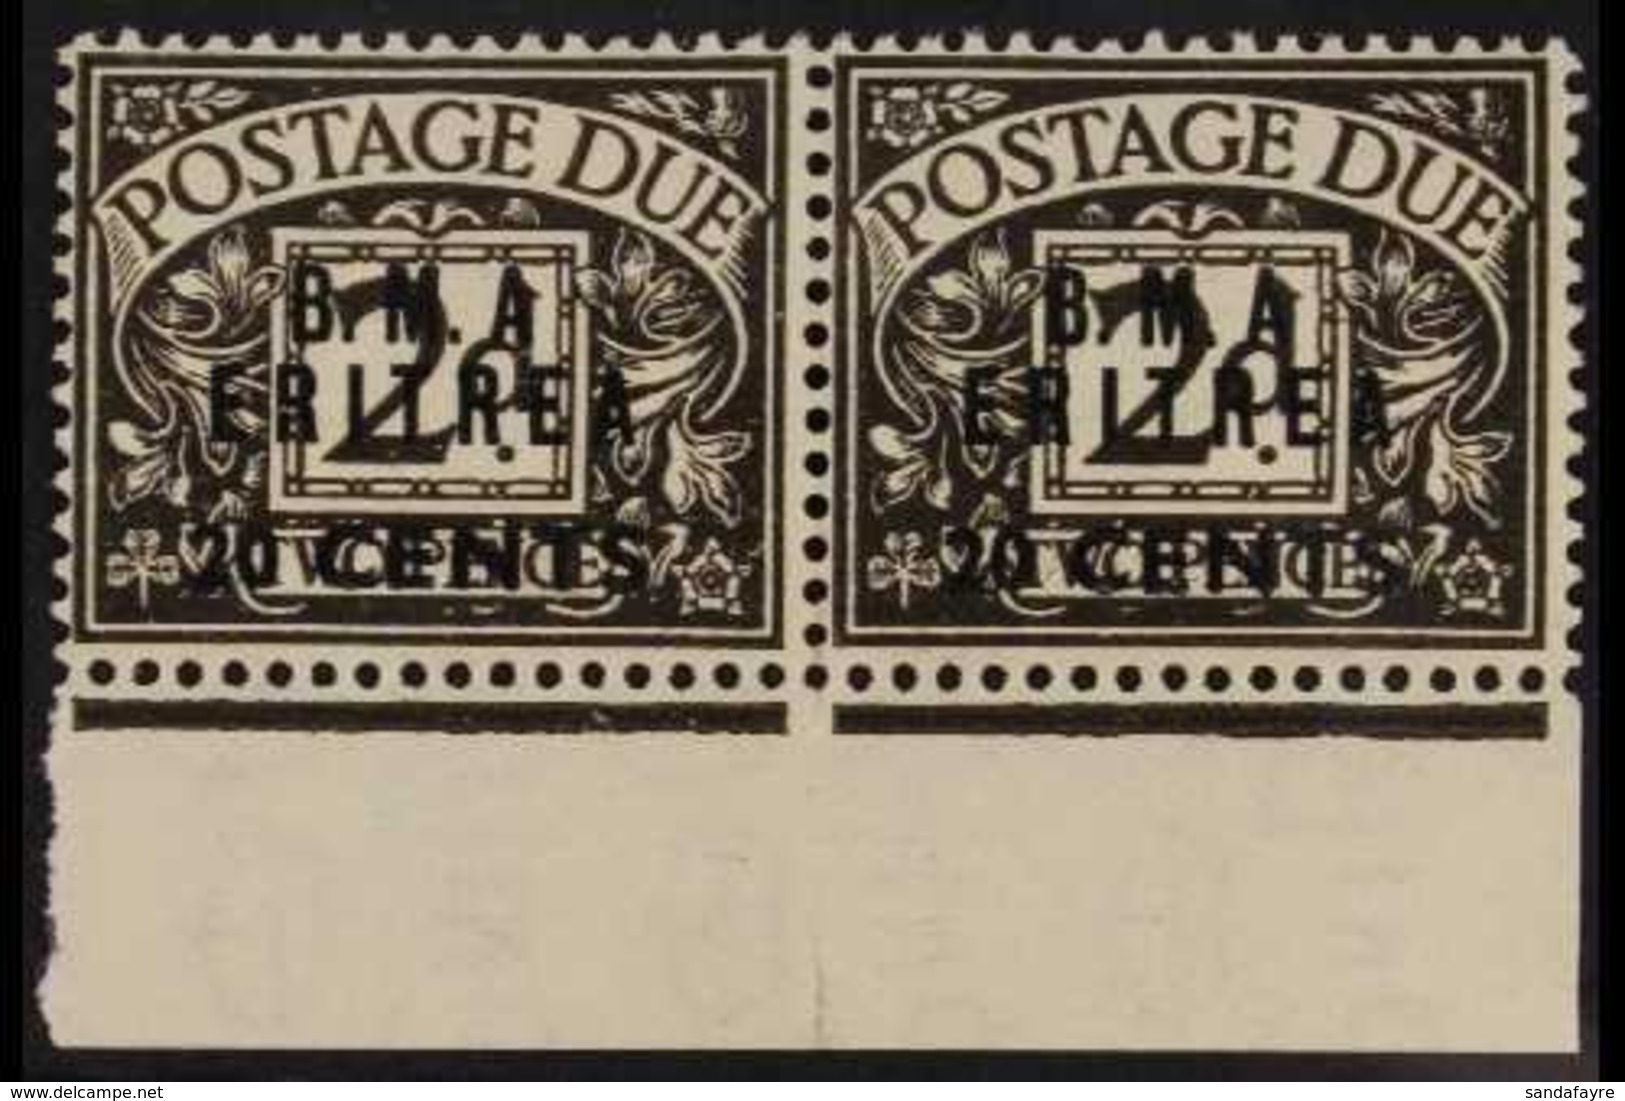 ERITREA POSTAGE DUES 1948 20c On 2d Agate, Horizontal Pair Both Showing Variety "No Stop After A", SG ED 3a, Very Fine M - Afrique Orientale Italienne